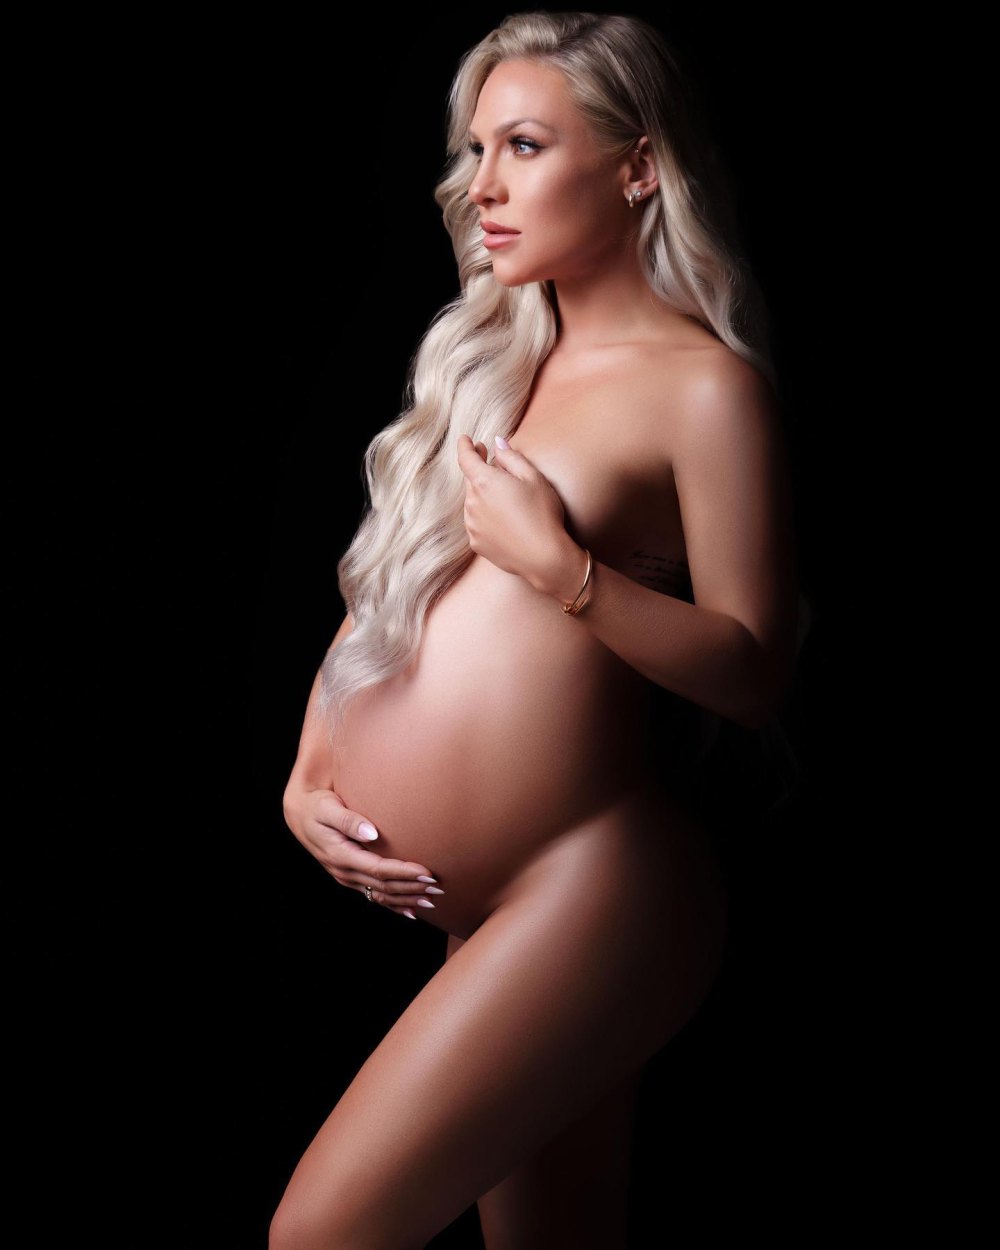 Pregnancy And Healthcare Concept. Beautiful Proud Soon-to-be